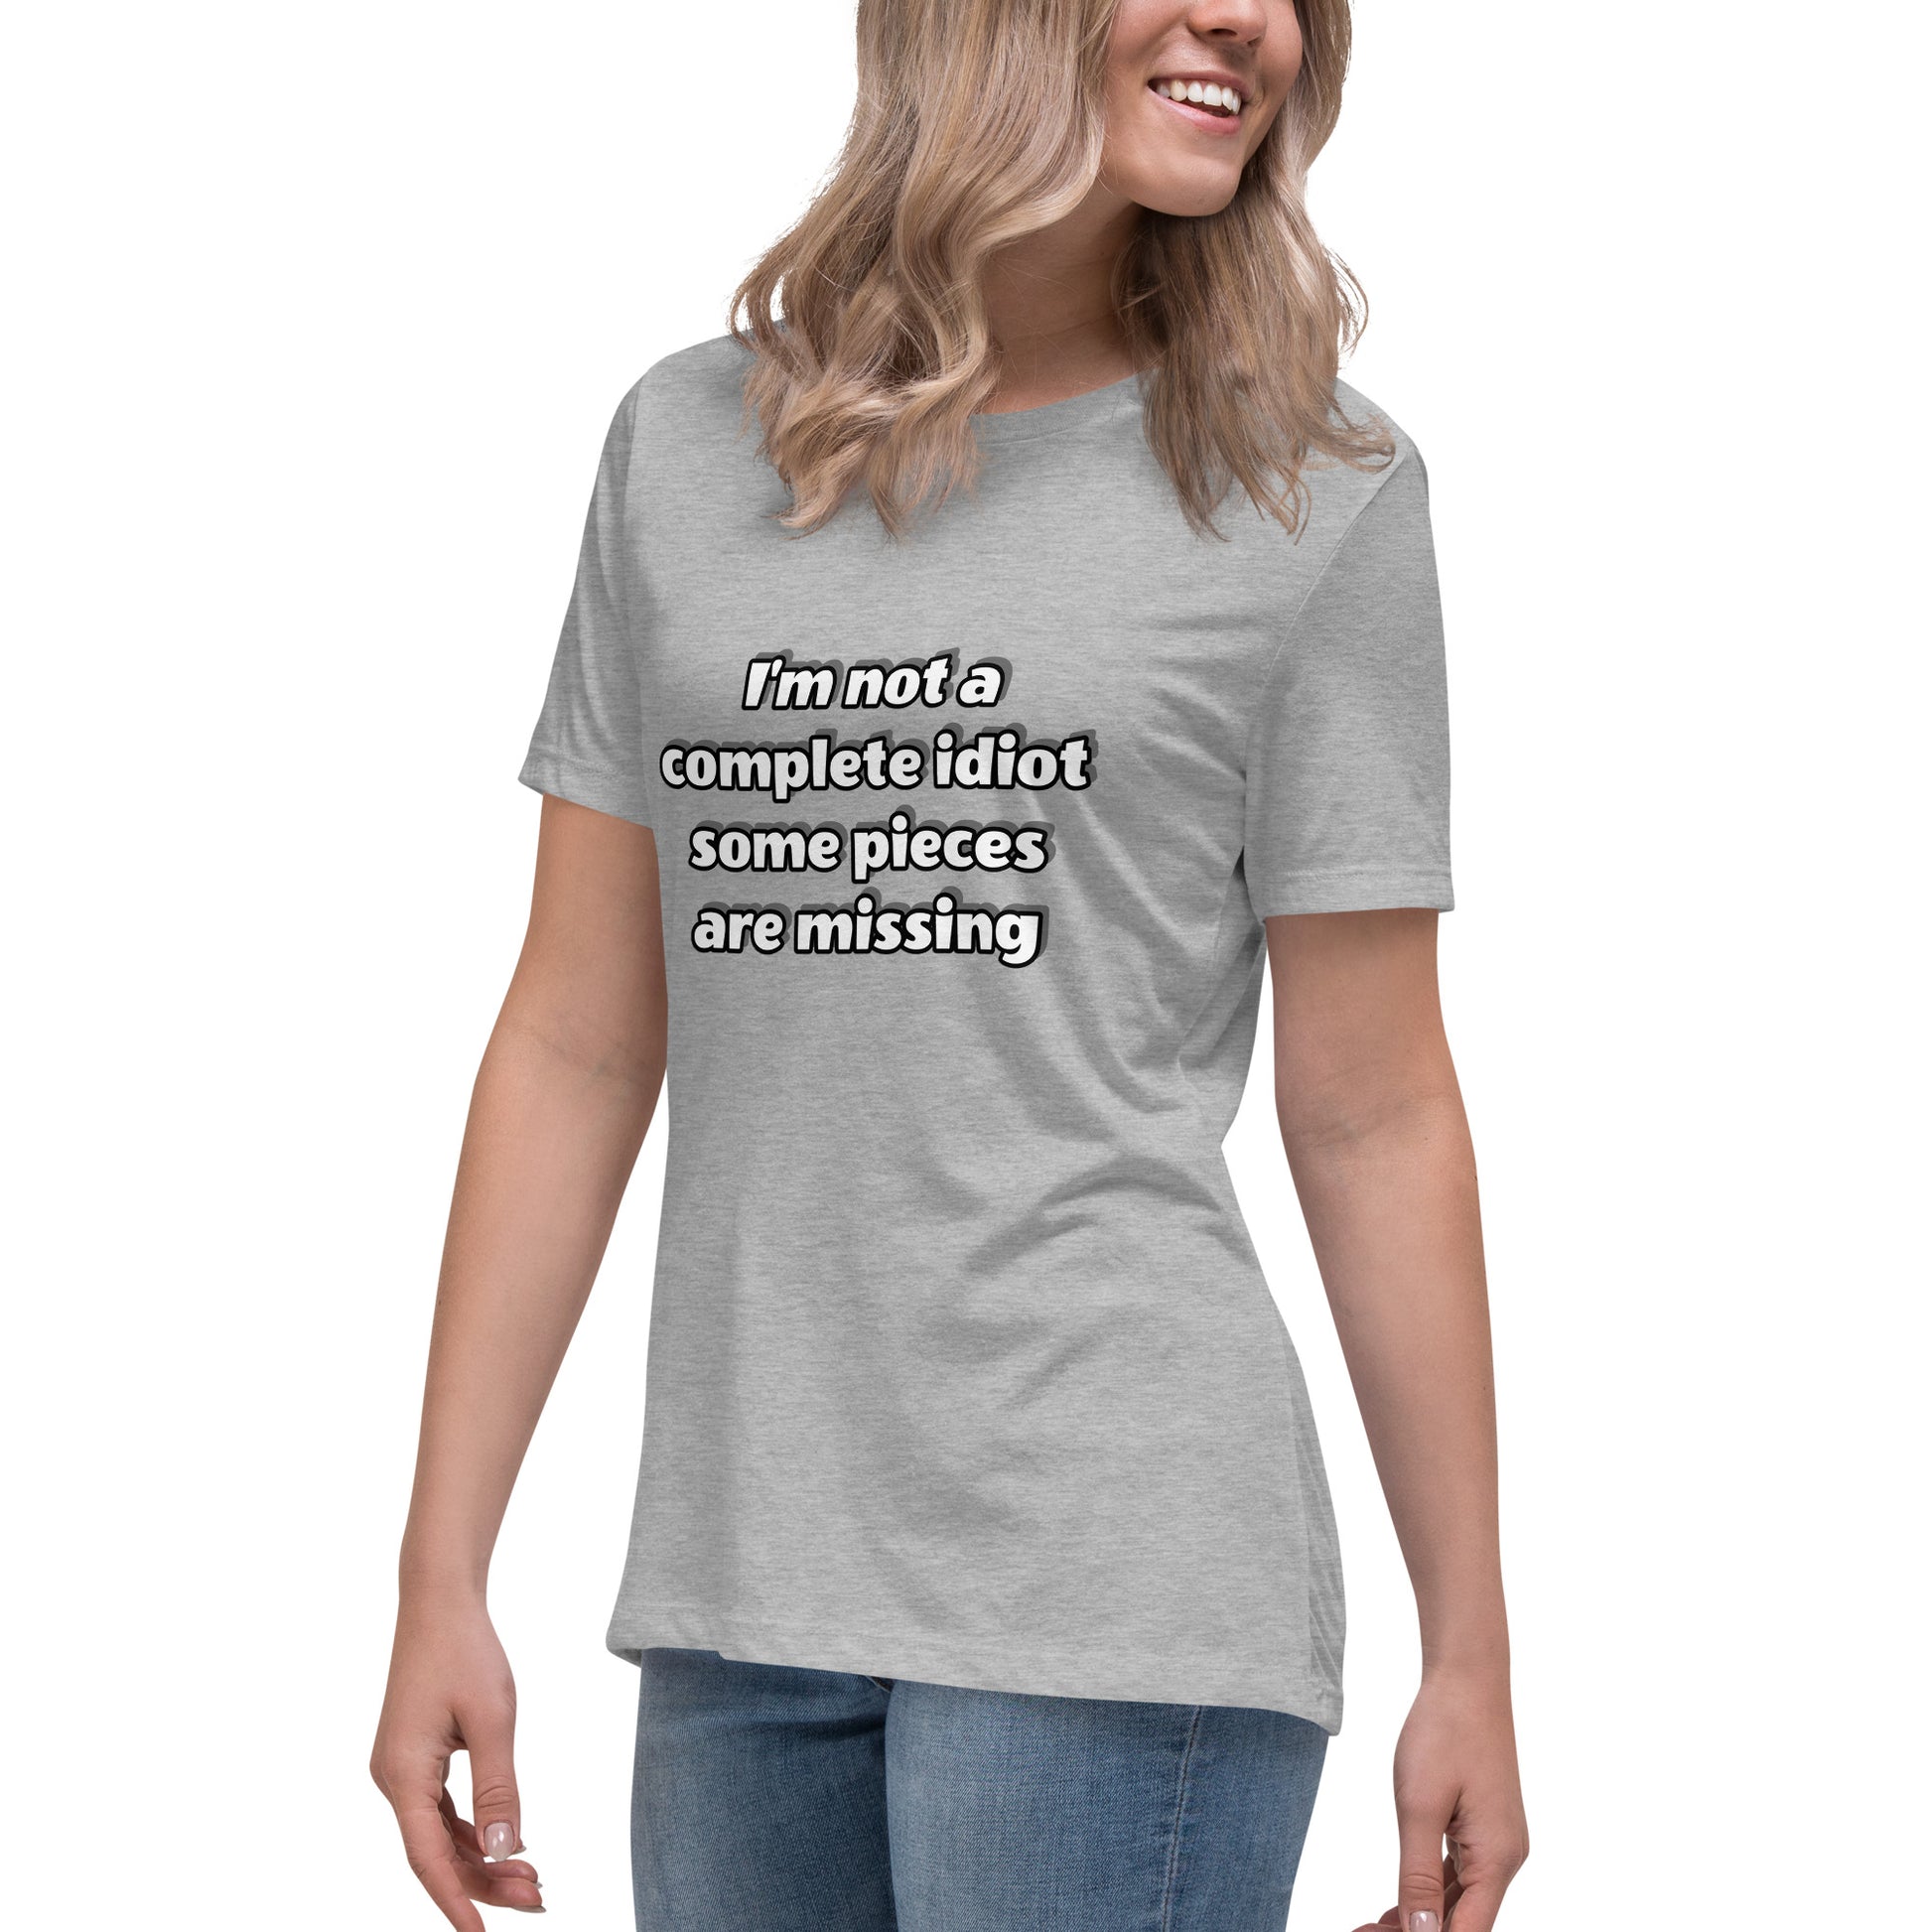 Women with grey t-shirt with text “I’m not a complete idiot, some pieces are missing”